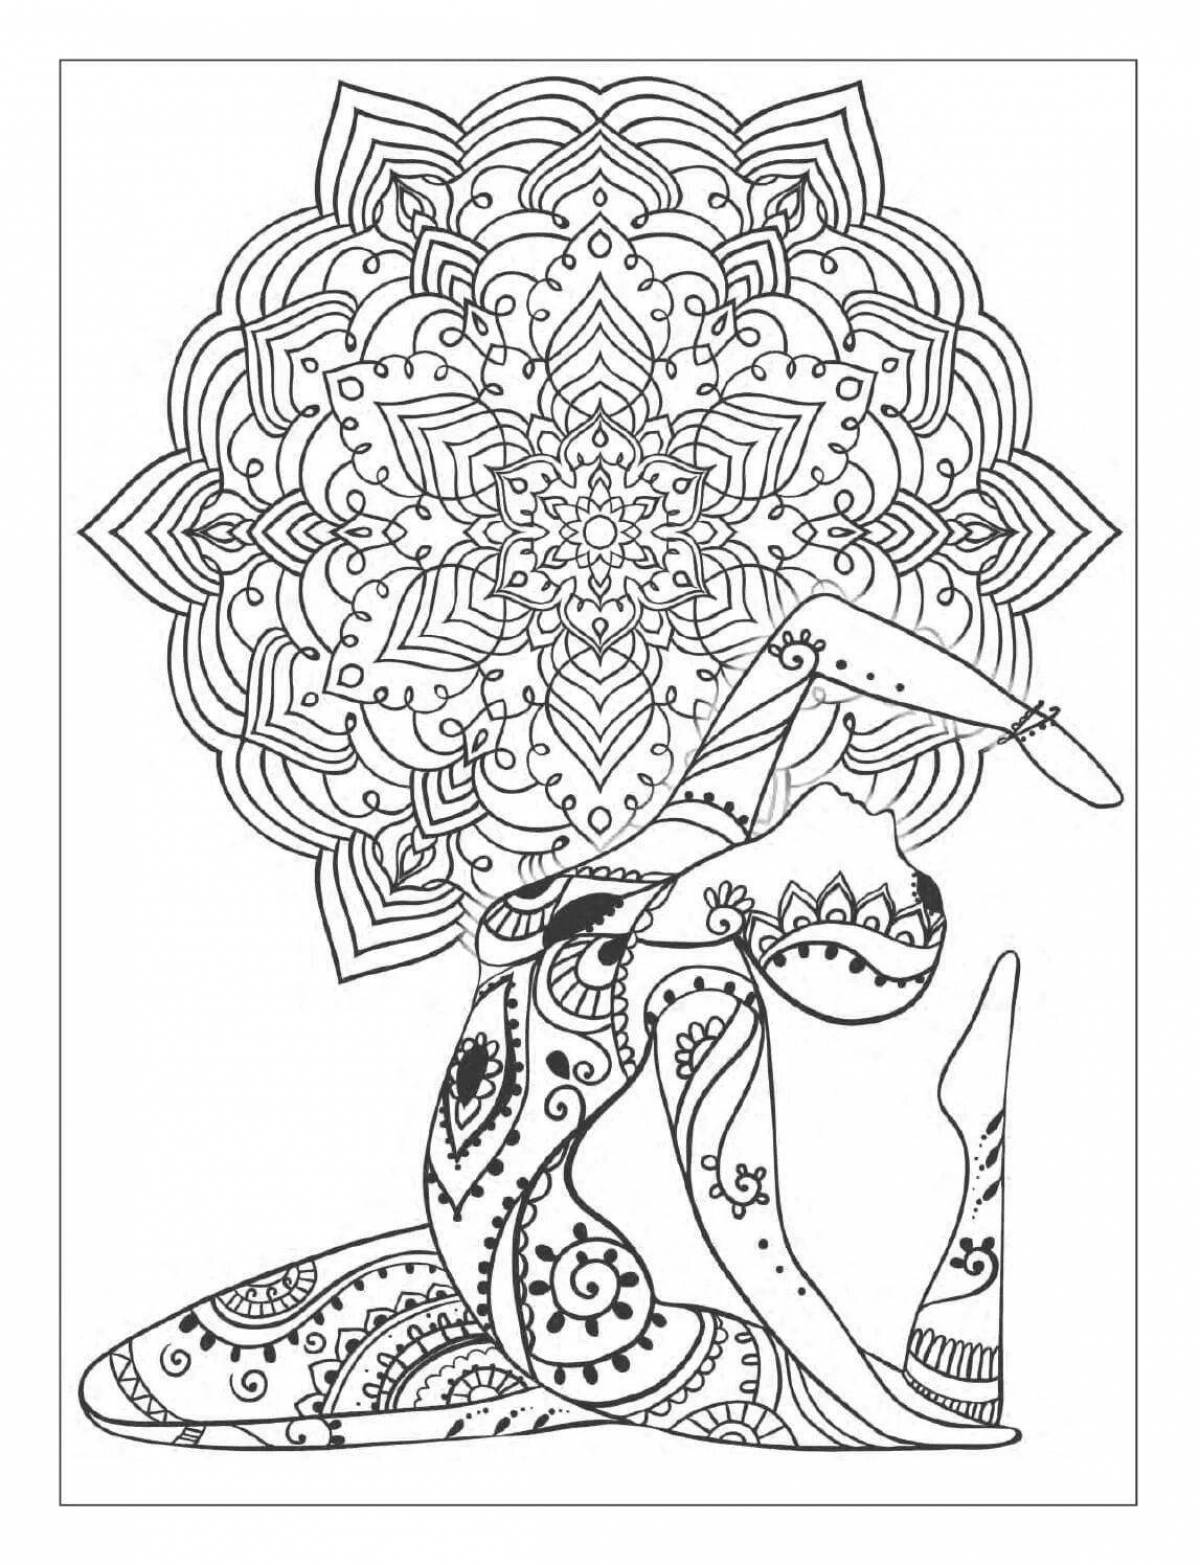 Blissful meditation coloring book